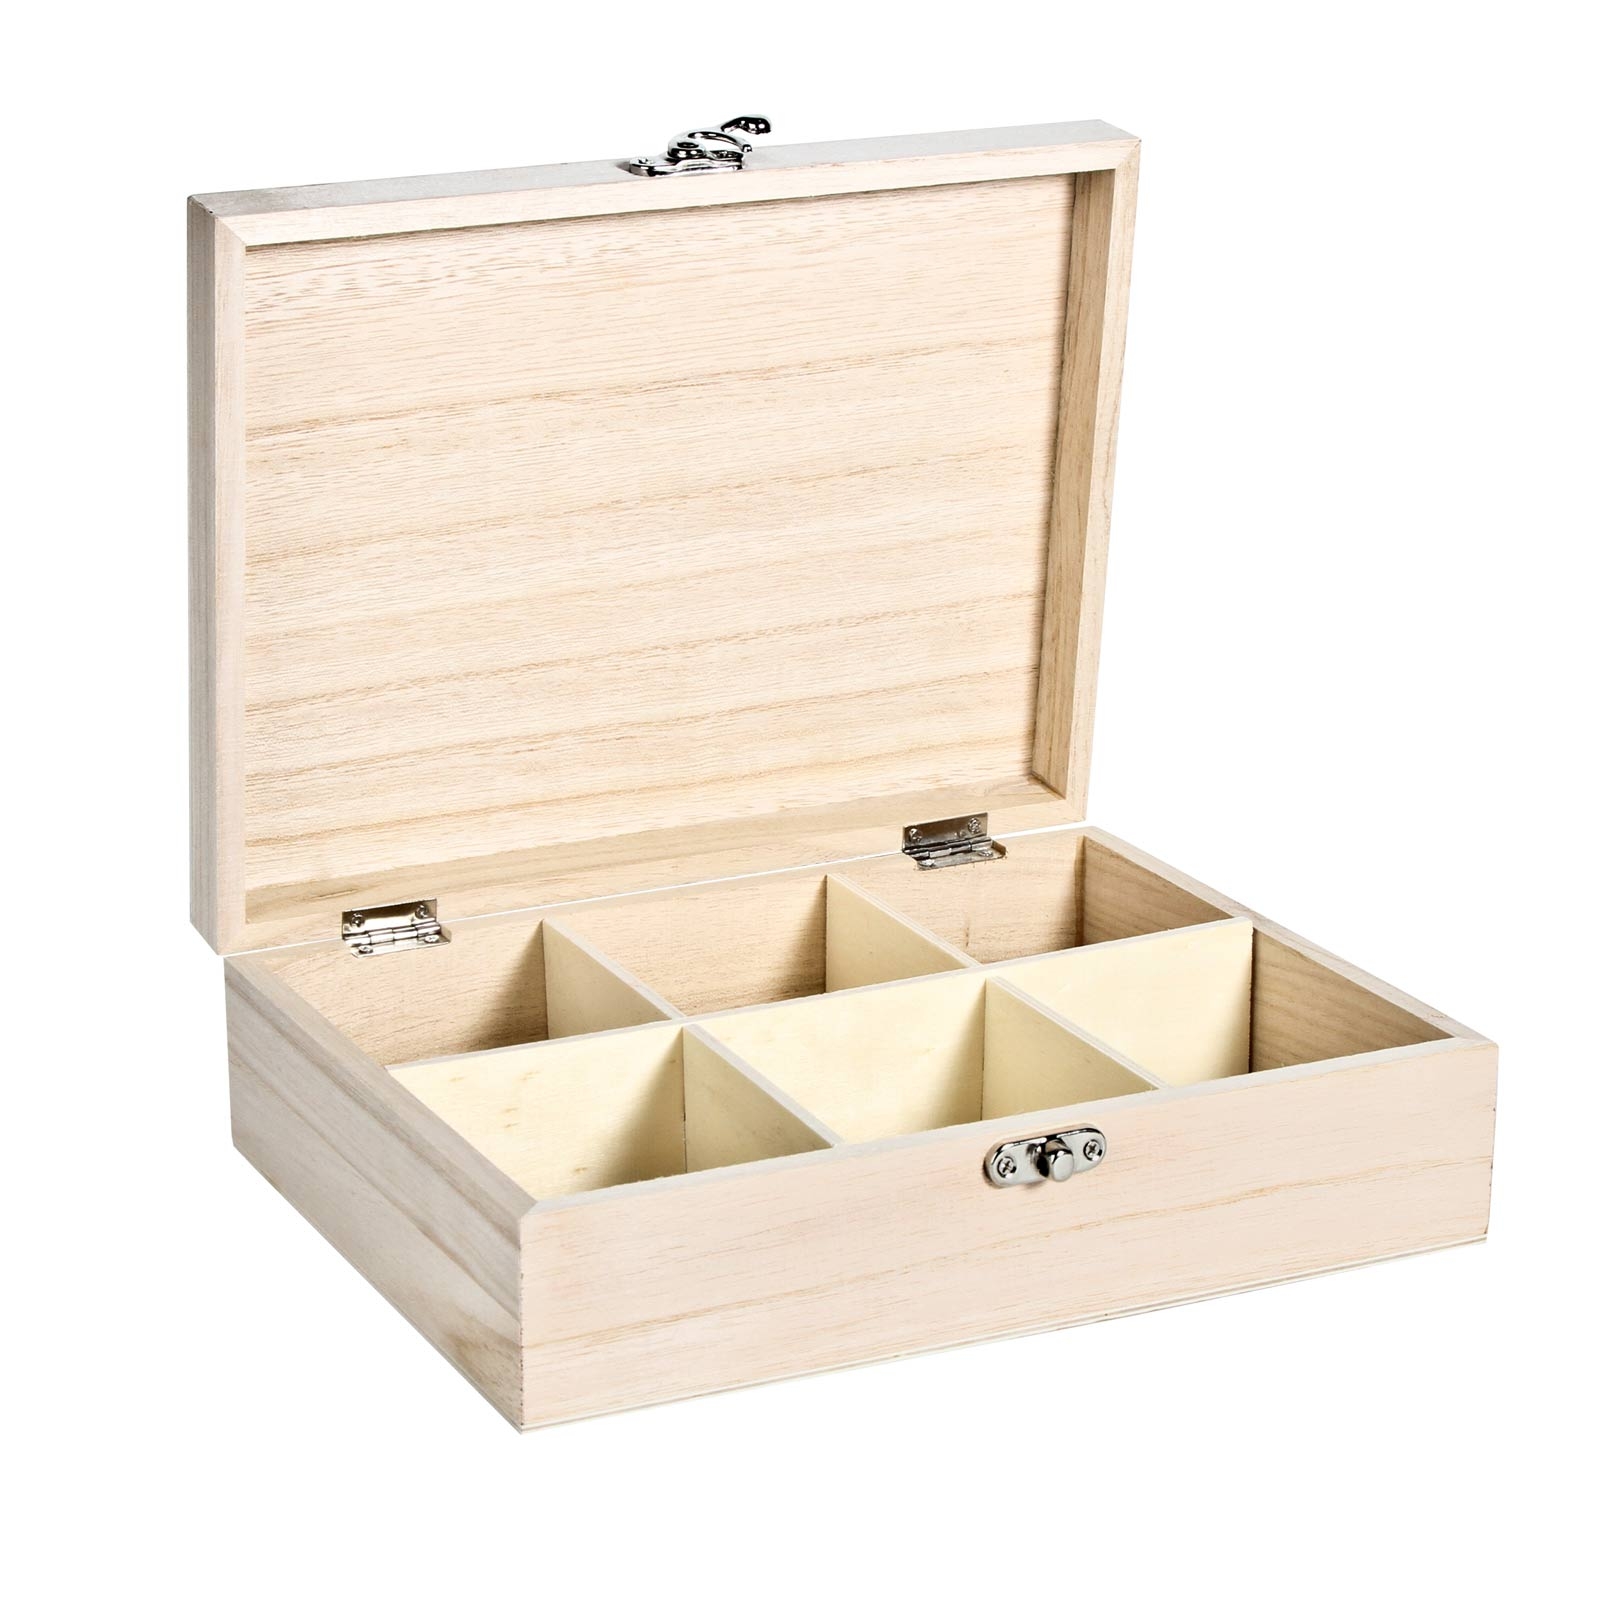 Wholesale Wooden Boxes, The Wooden Box Mill